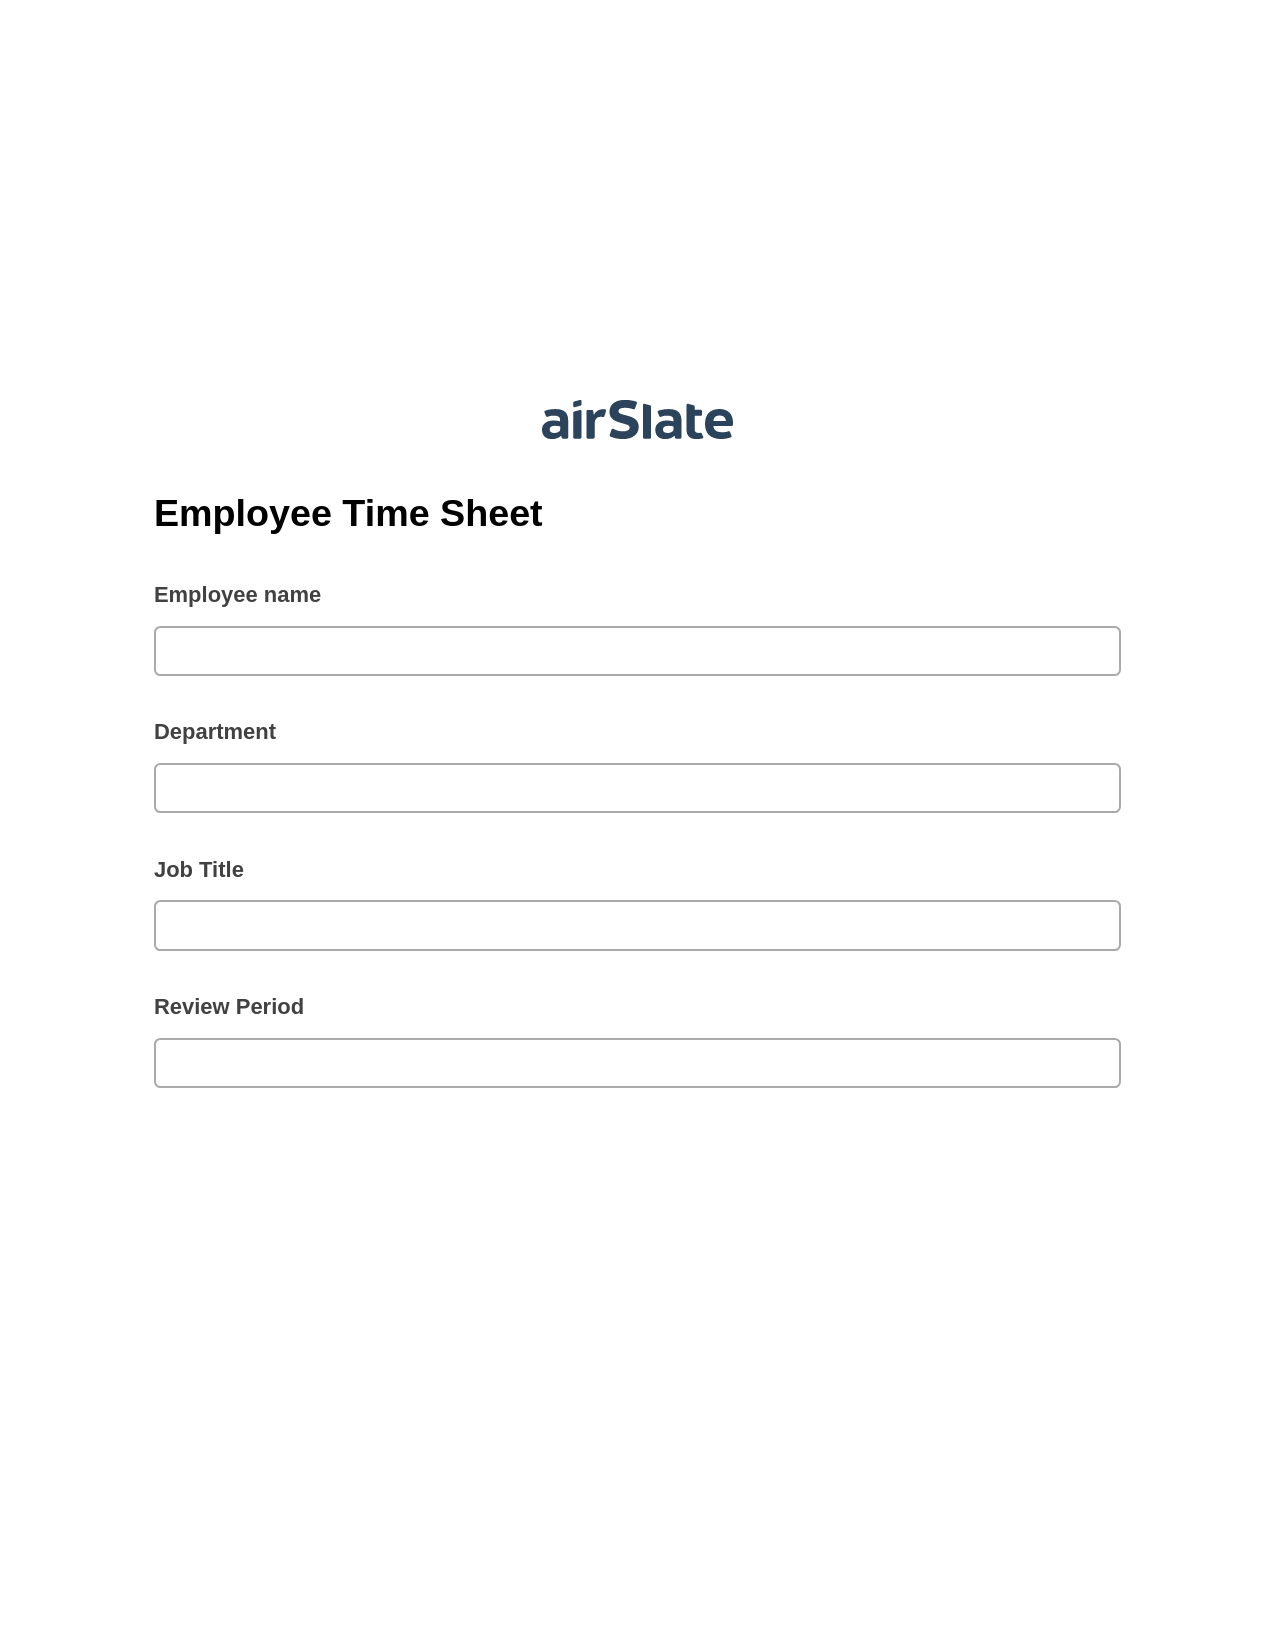 Employee Time Sheet Pre-fill Dropdowns from Excel Bot, Update Audit Trail Bot, Export to Smartsheet